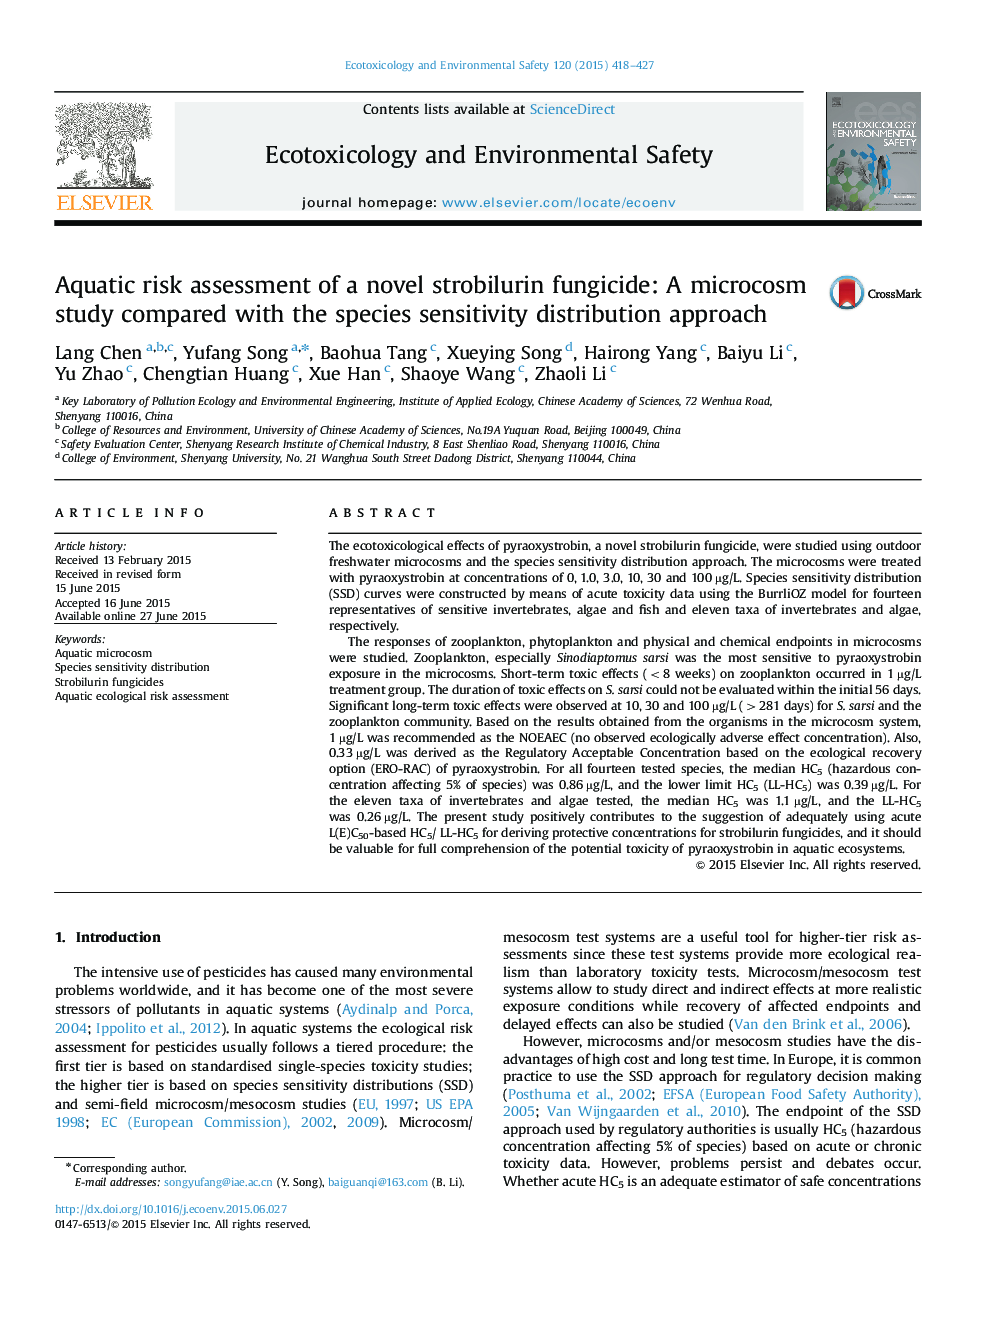 Aquatic risk assessment of a novel strobilurin fungicide: A microcosm study compared with the species sensitivity distribution approach